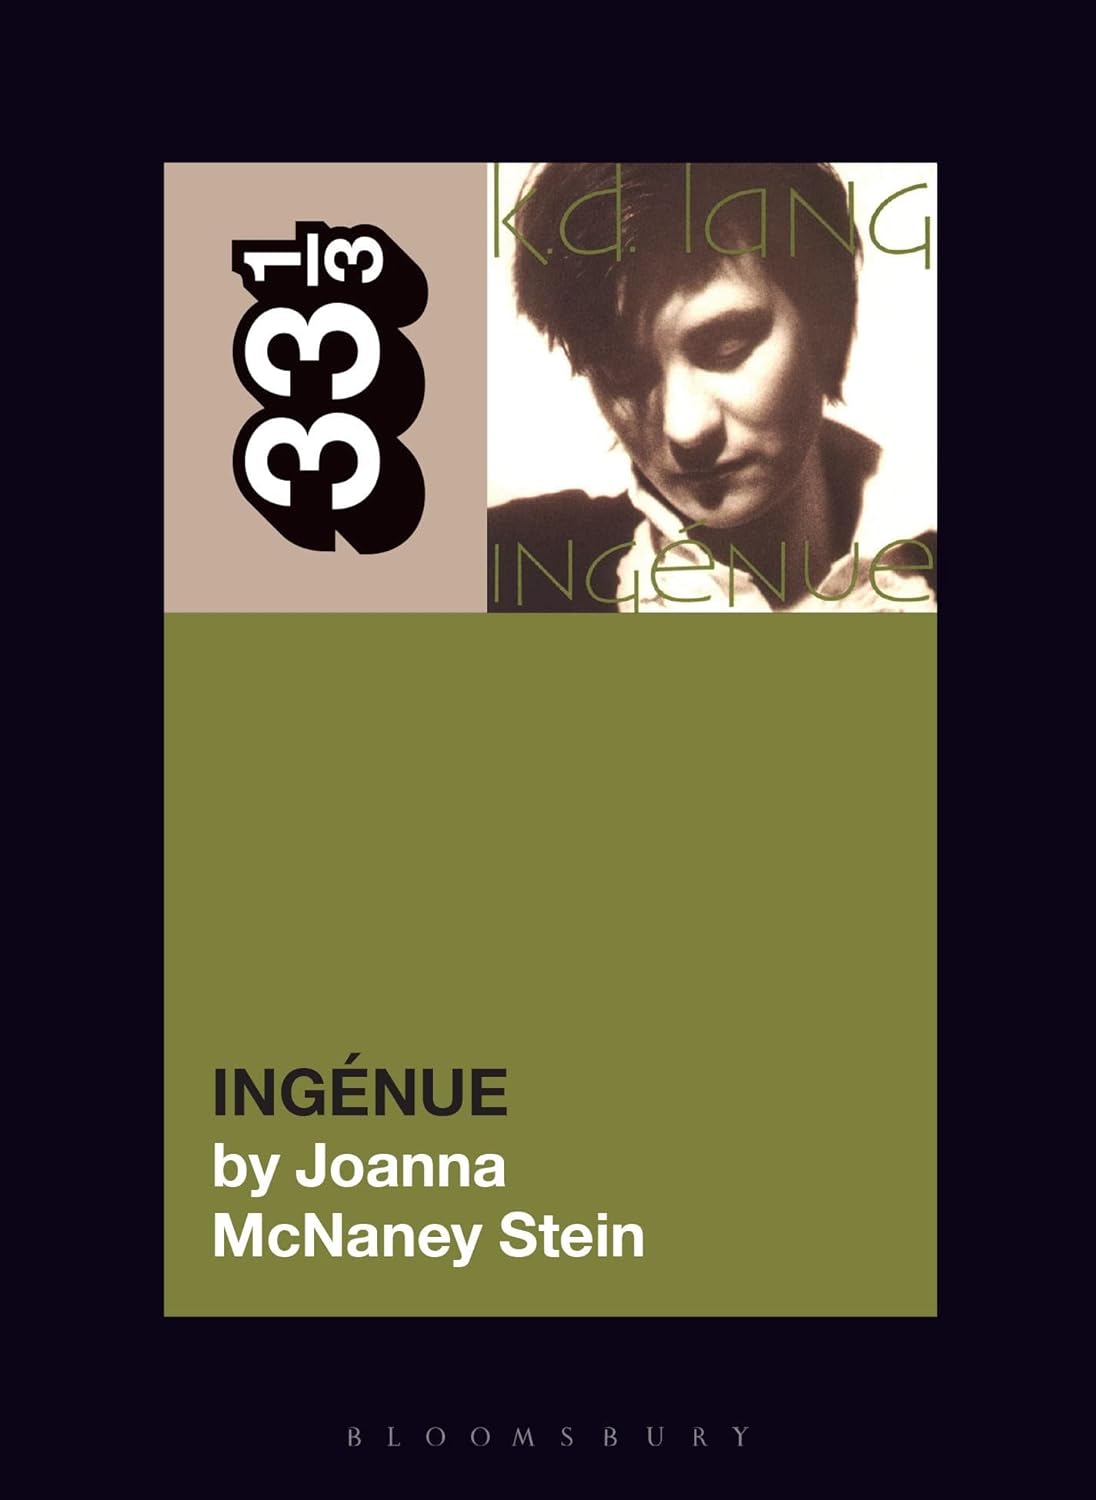 Book Launch: k.d. lang's Ingénue (33 1/3) by Joanna McNaney Stein